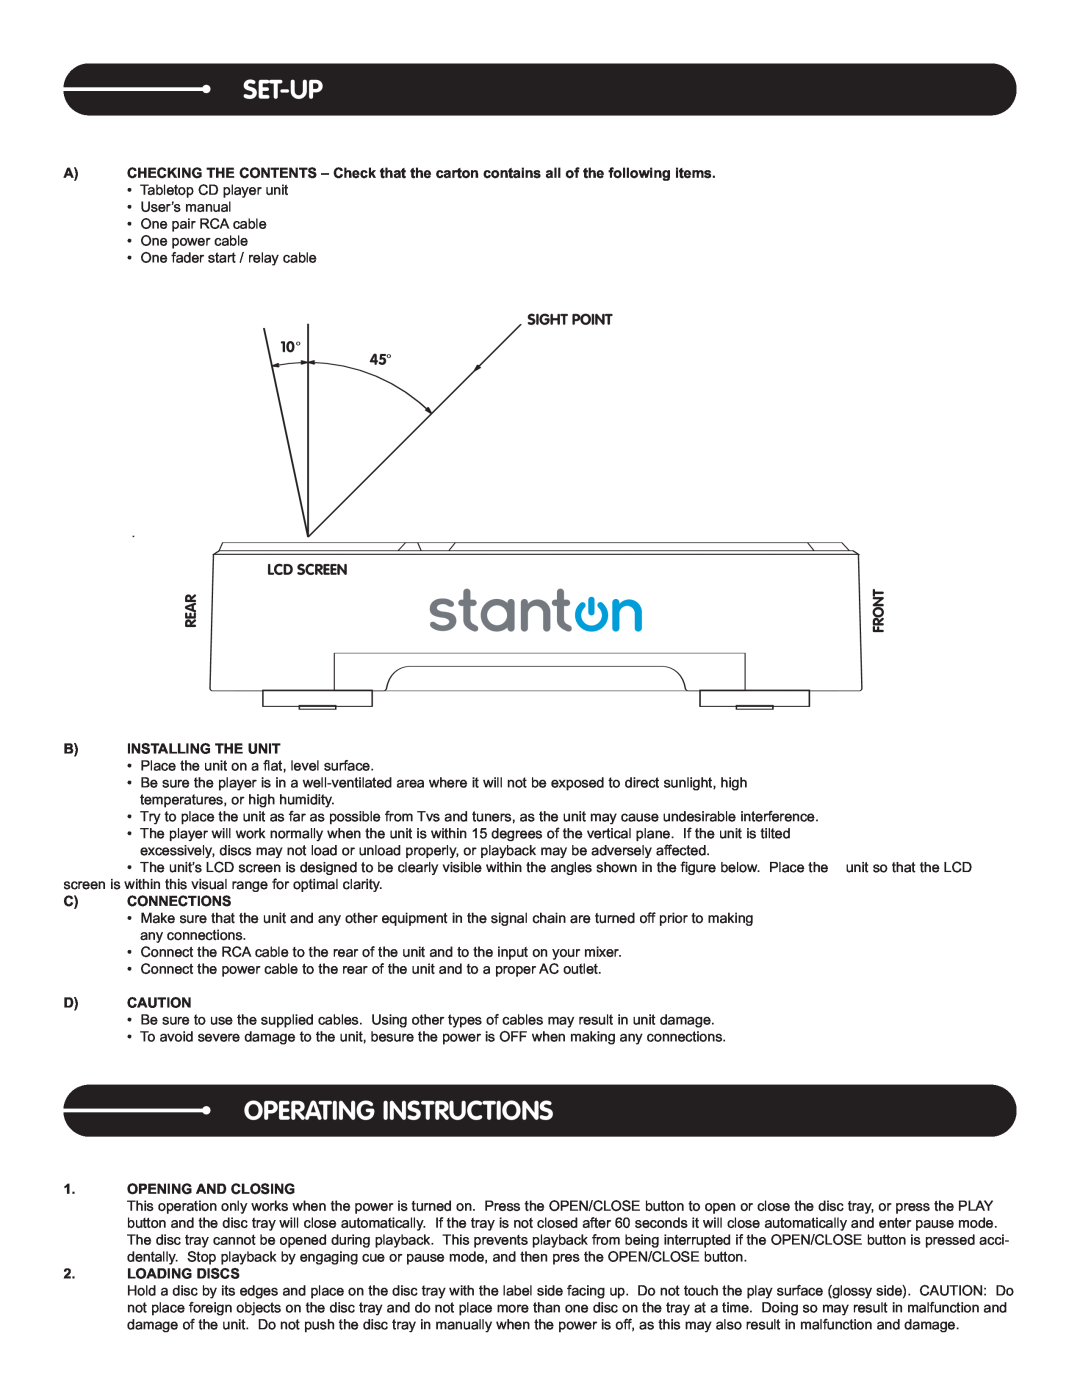 Stanton C.304 manual Set-Up, Operating Instructions, Installing The Unit, Connections, Dcaution, Opening And Closing 